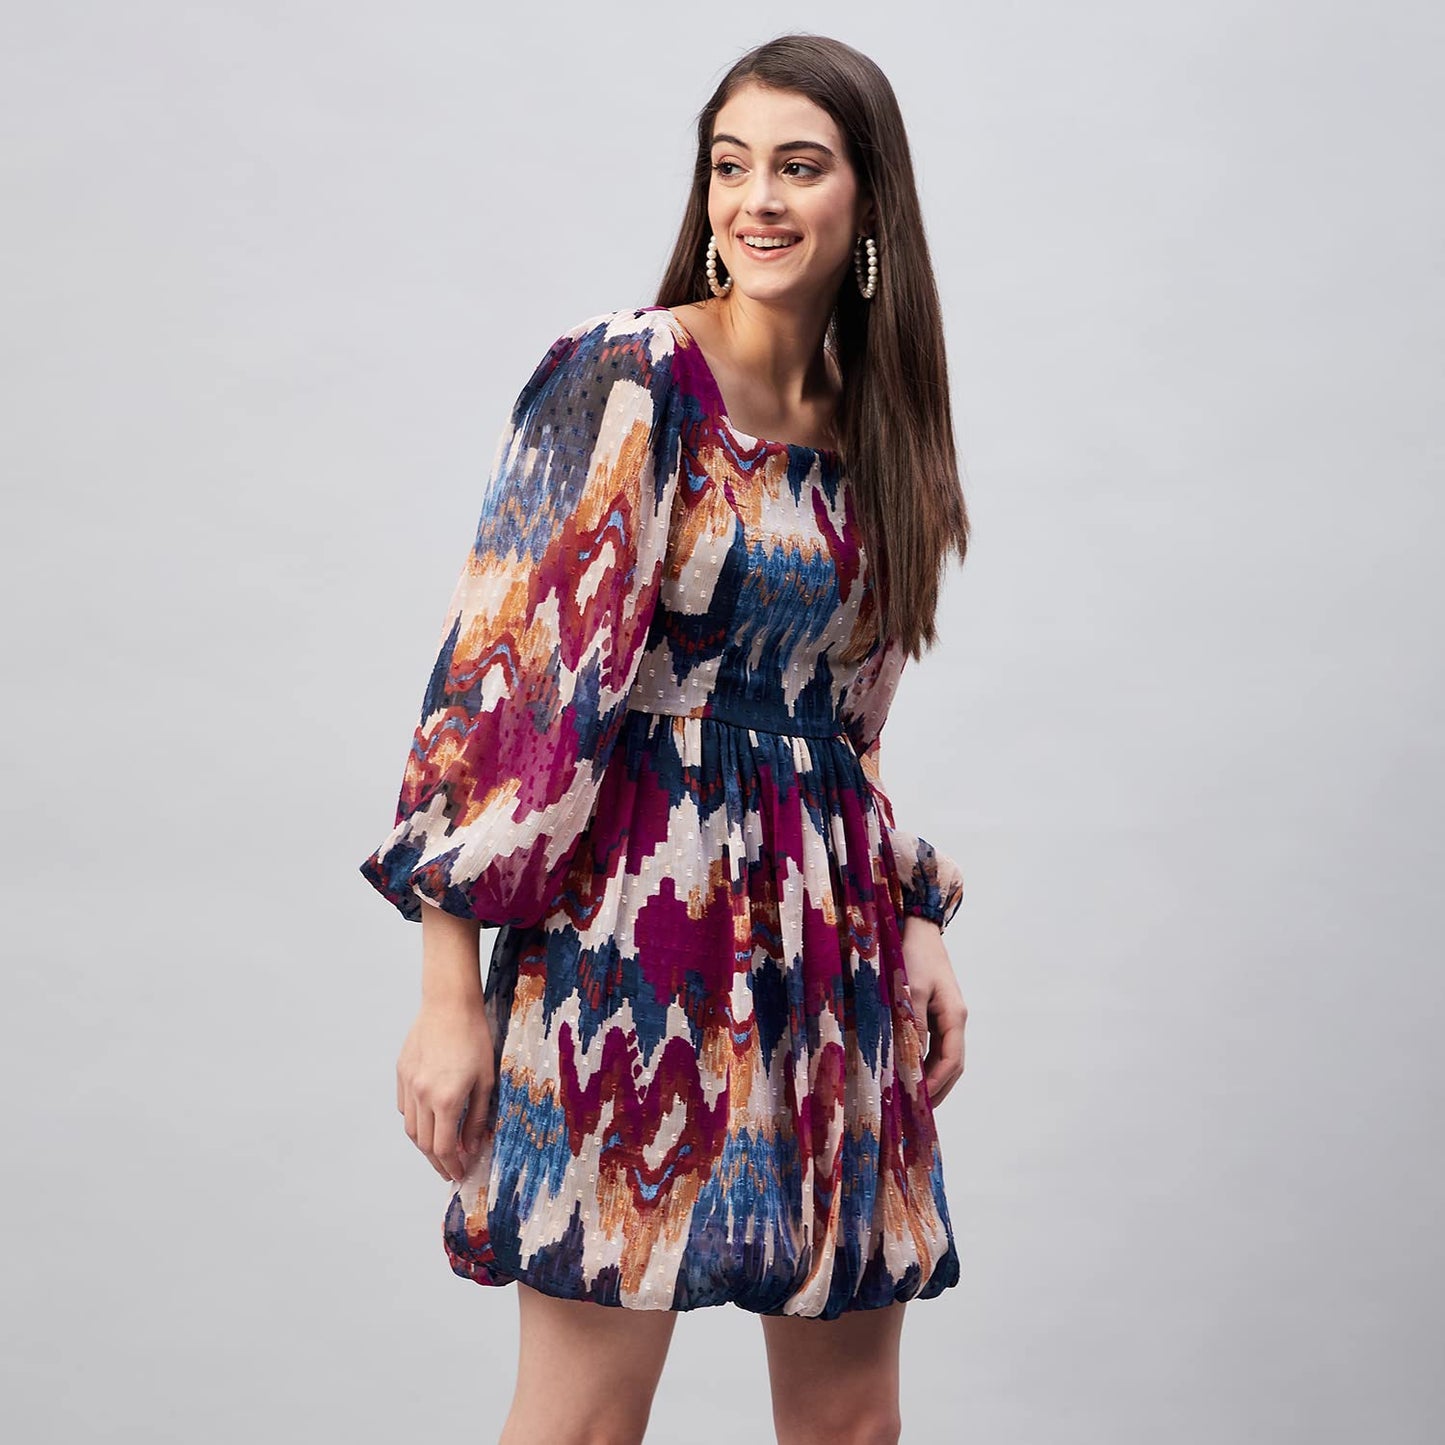 Carlton London Women's Chiffon Fit and Flare Above The Knee Dress (CL656A_Multi_XS) Multicolour